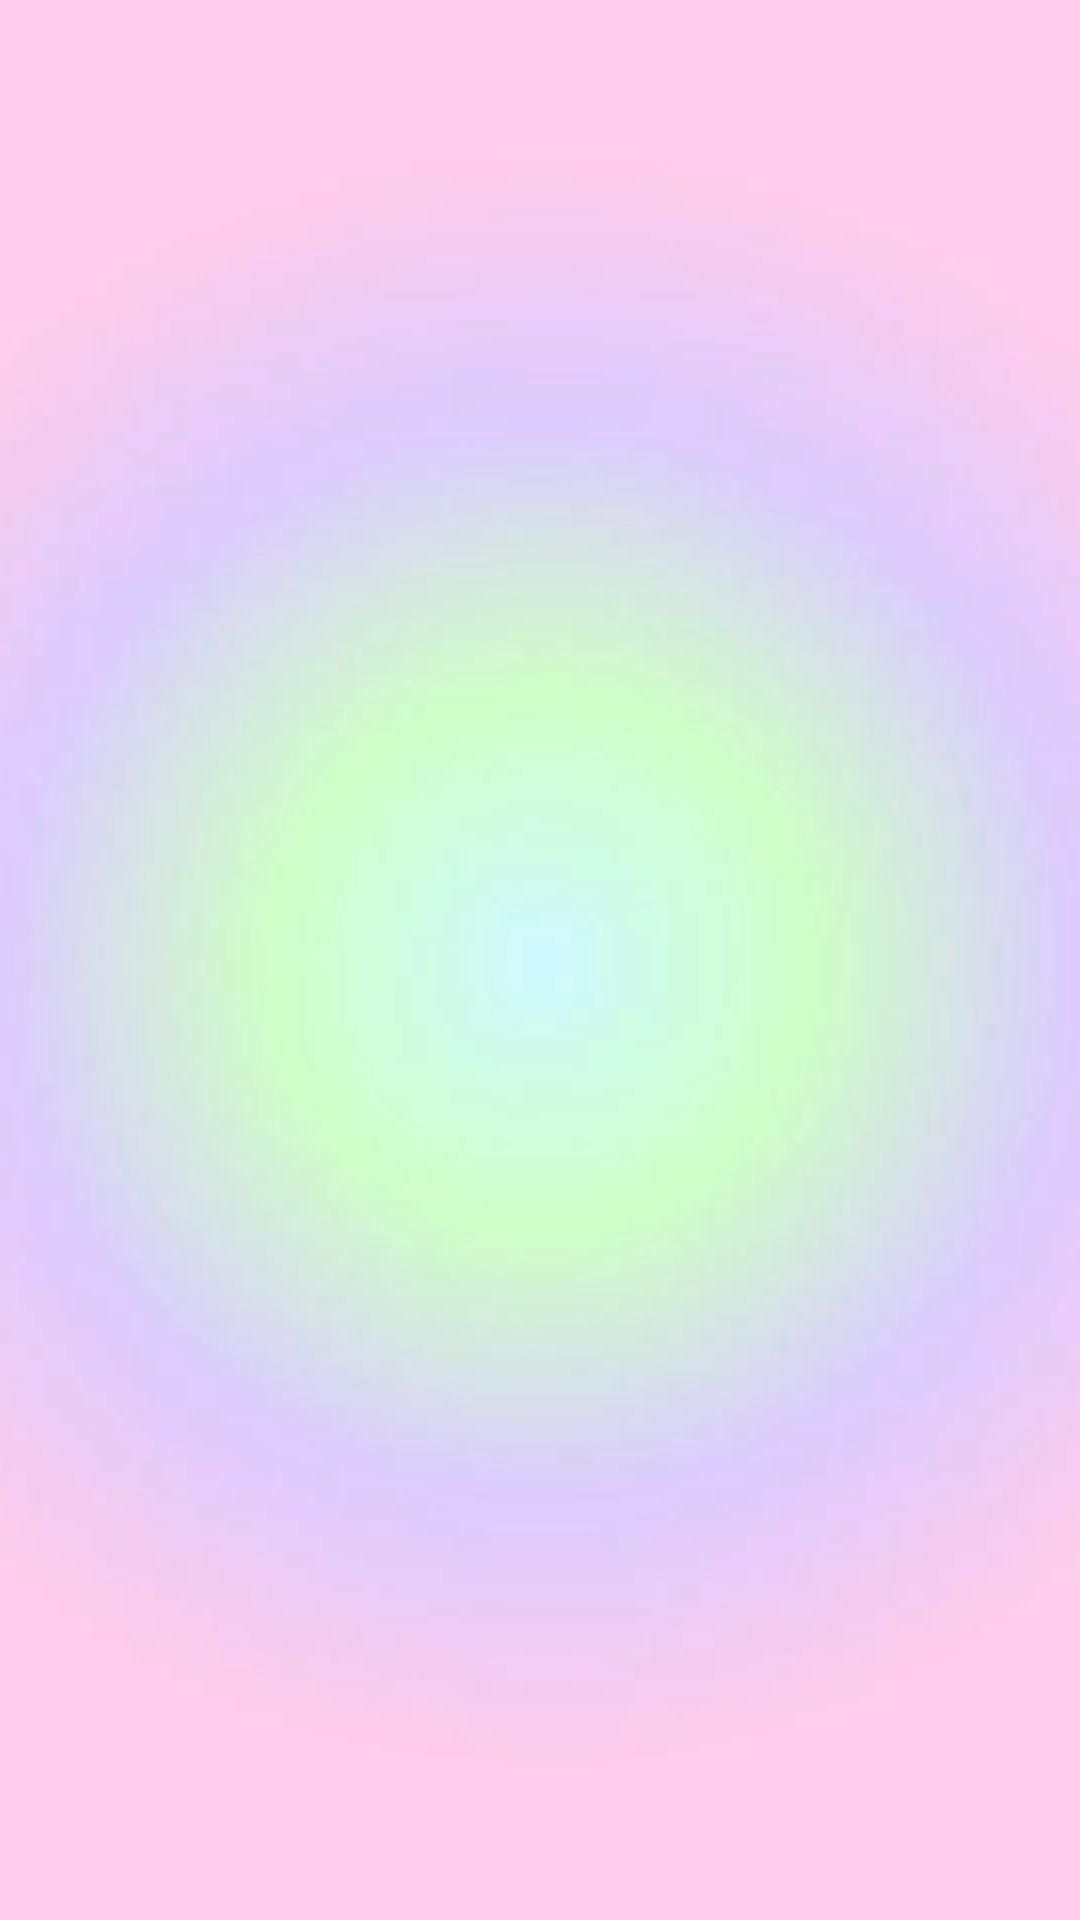 Pastel iPhone 8 Wallpaper with high-resolution 1080x1920 pixel. You can use this wallpaper for your iPhone 8 Home Screen, iPhone 8 Lock Screen, iPhone 8 Wallpaper, iPhone 8 Plus Wallpaper, iPhone XS, iPhone XS Max, iPhone XR, iPhone X, iPhone XS Wallpaper, and any other device - Colorful, aura